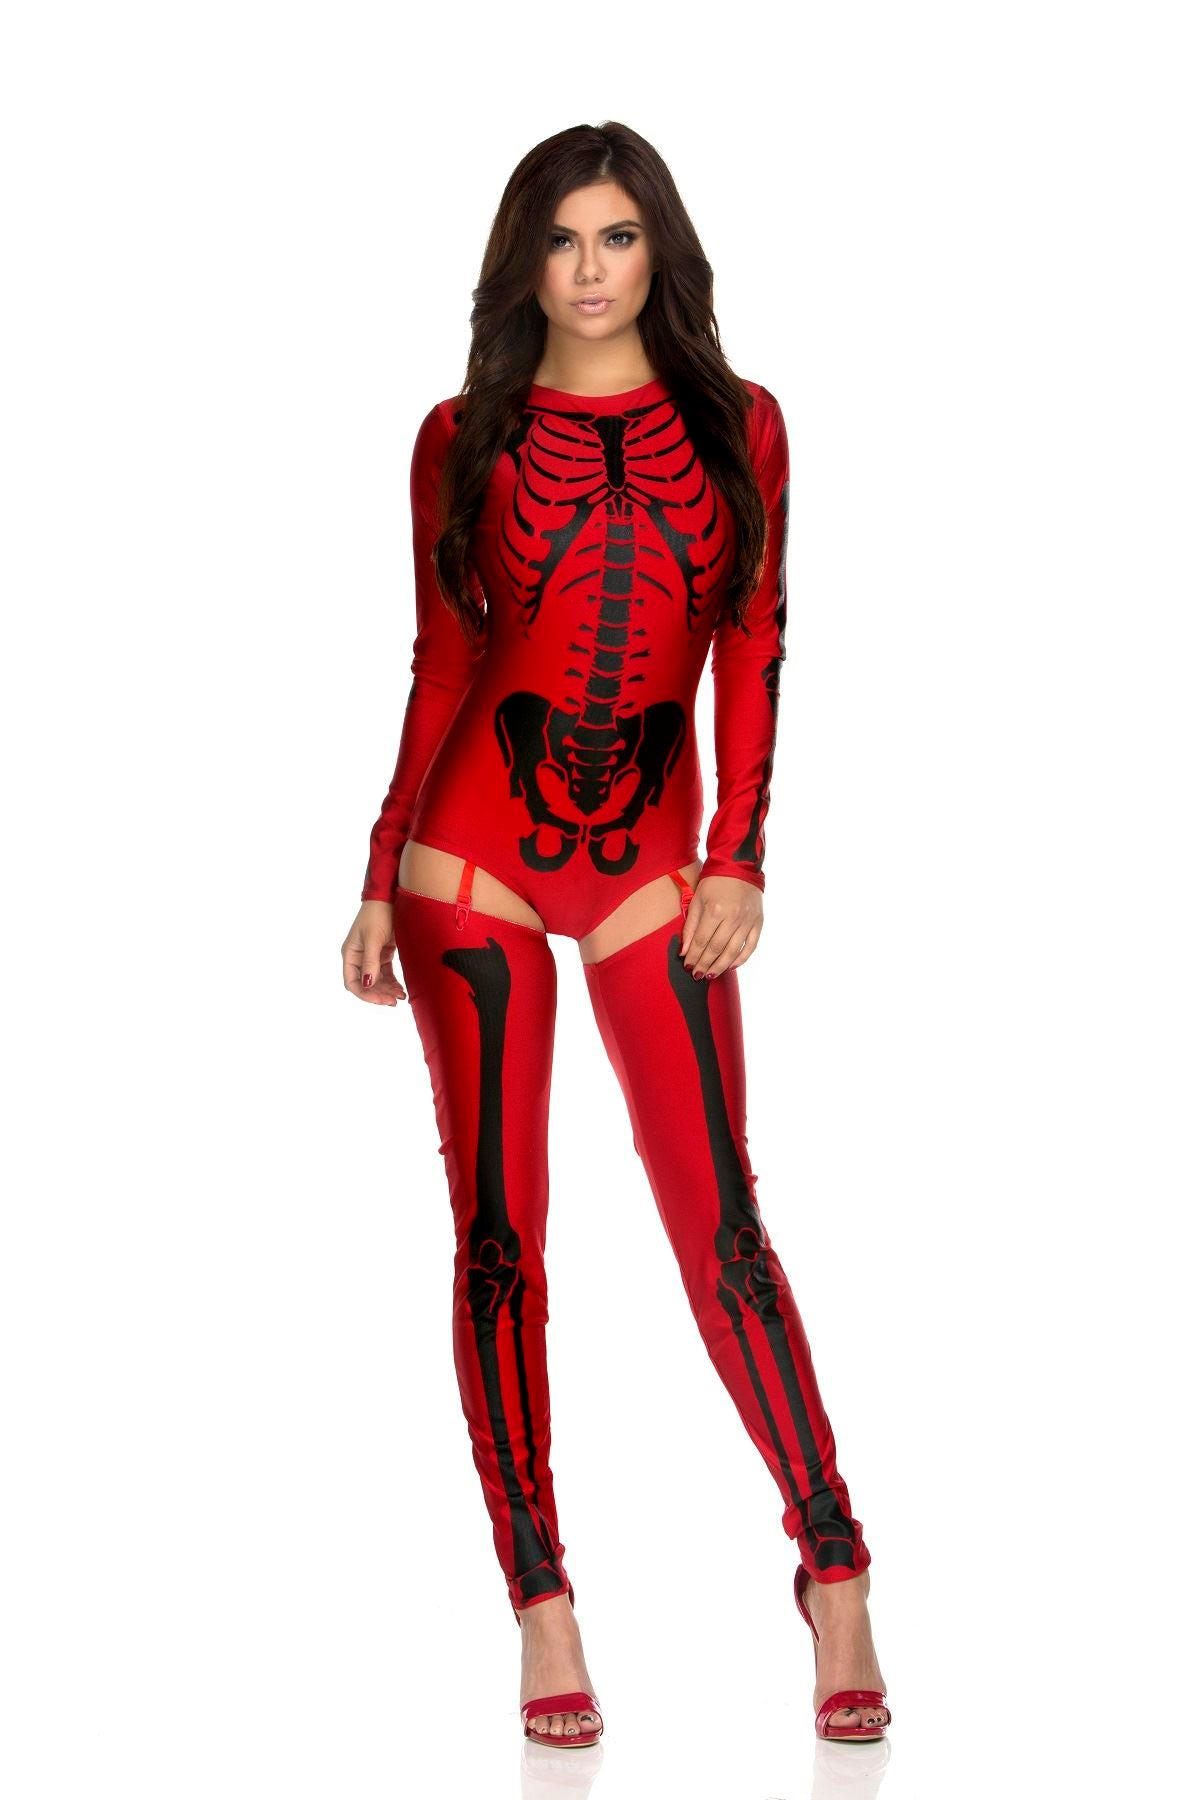 Skeleton Red Black Print Woman Costume by Forplay only at  TeeJayTraders.com